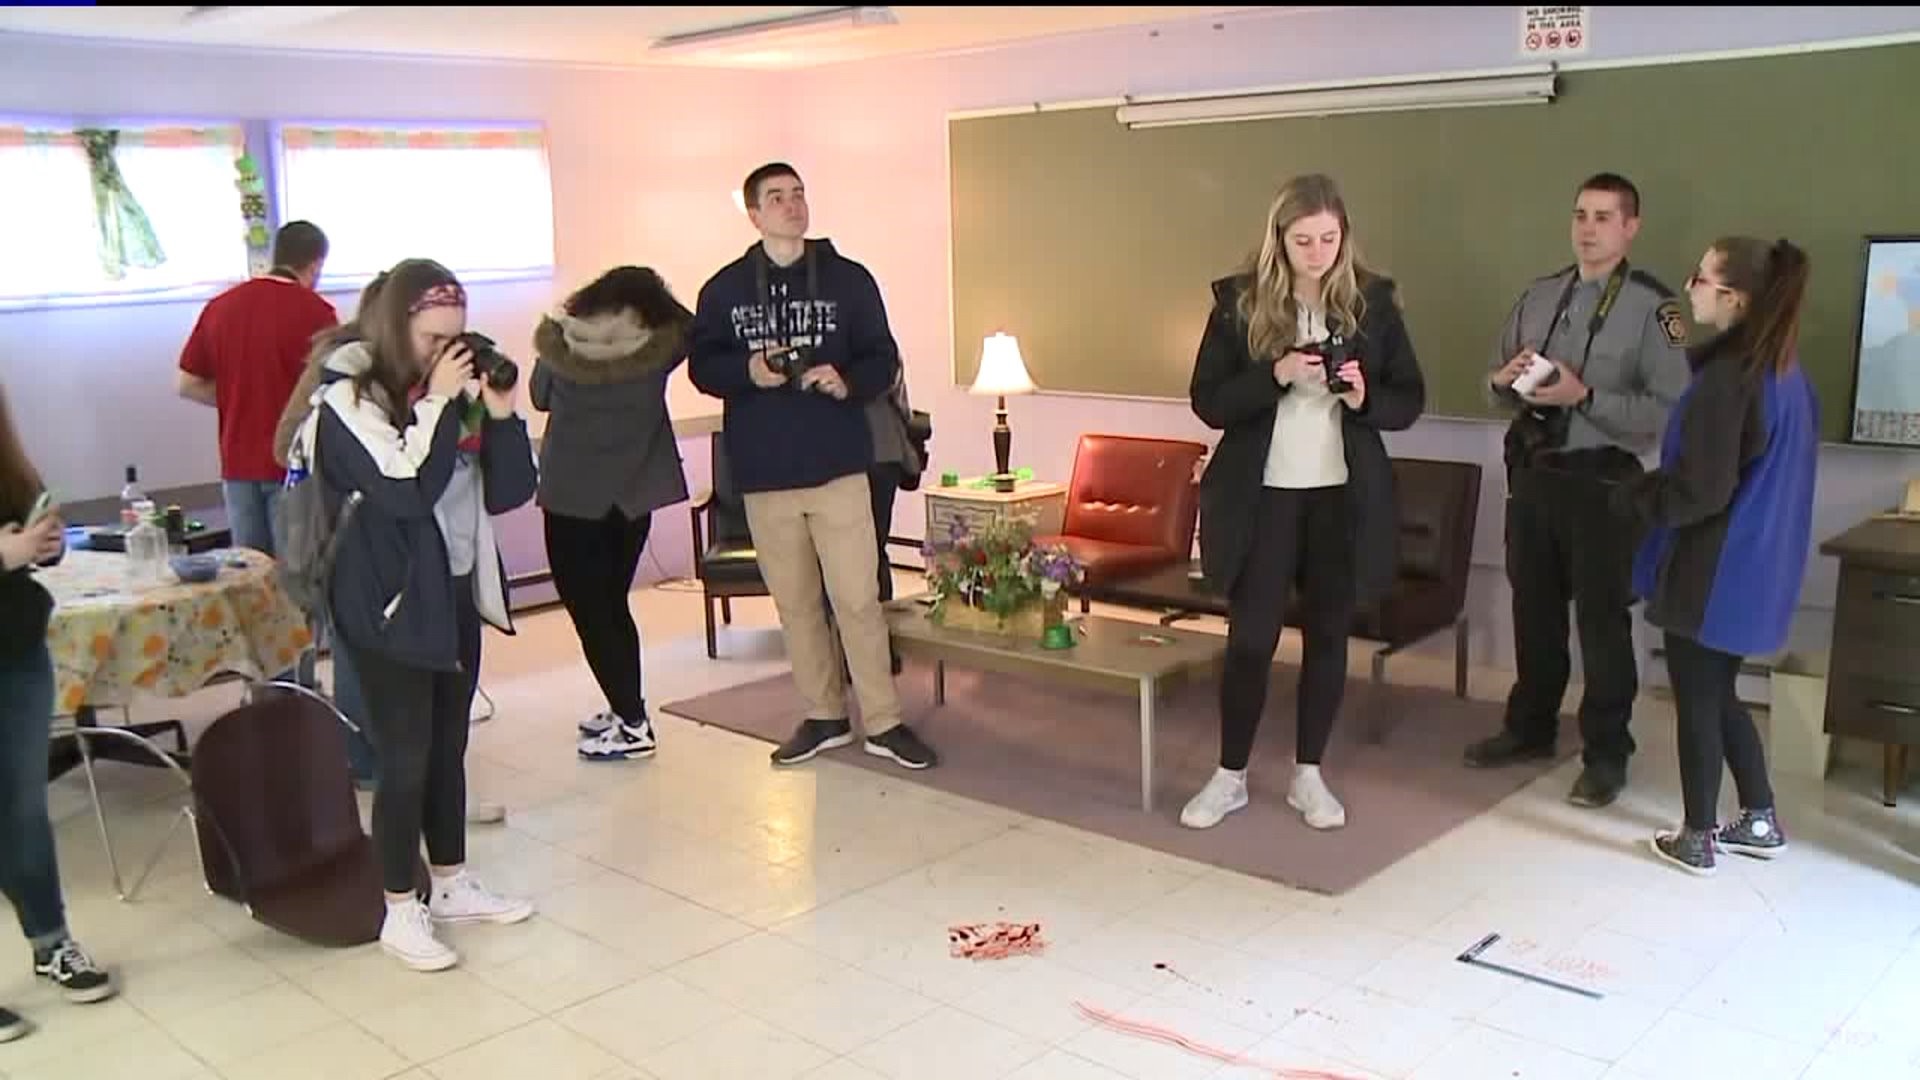 Fake Crime Scene Provides Real Experience for Students